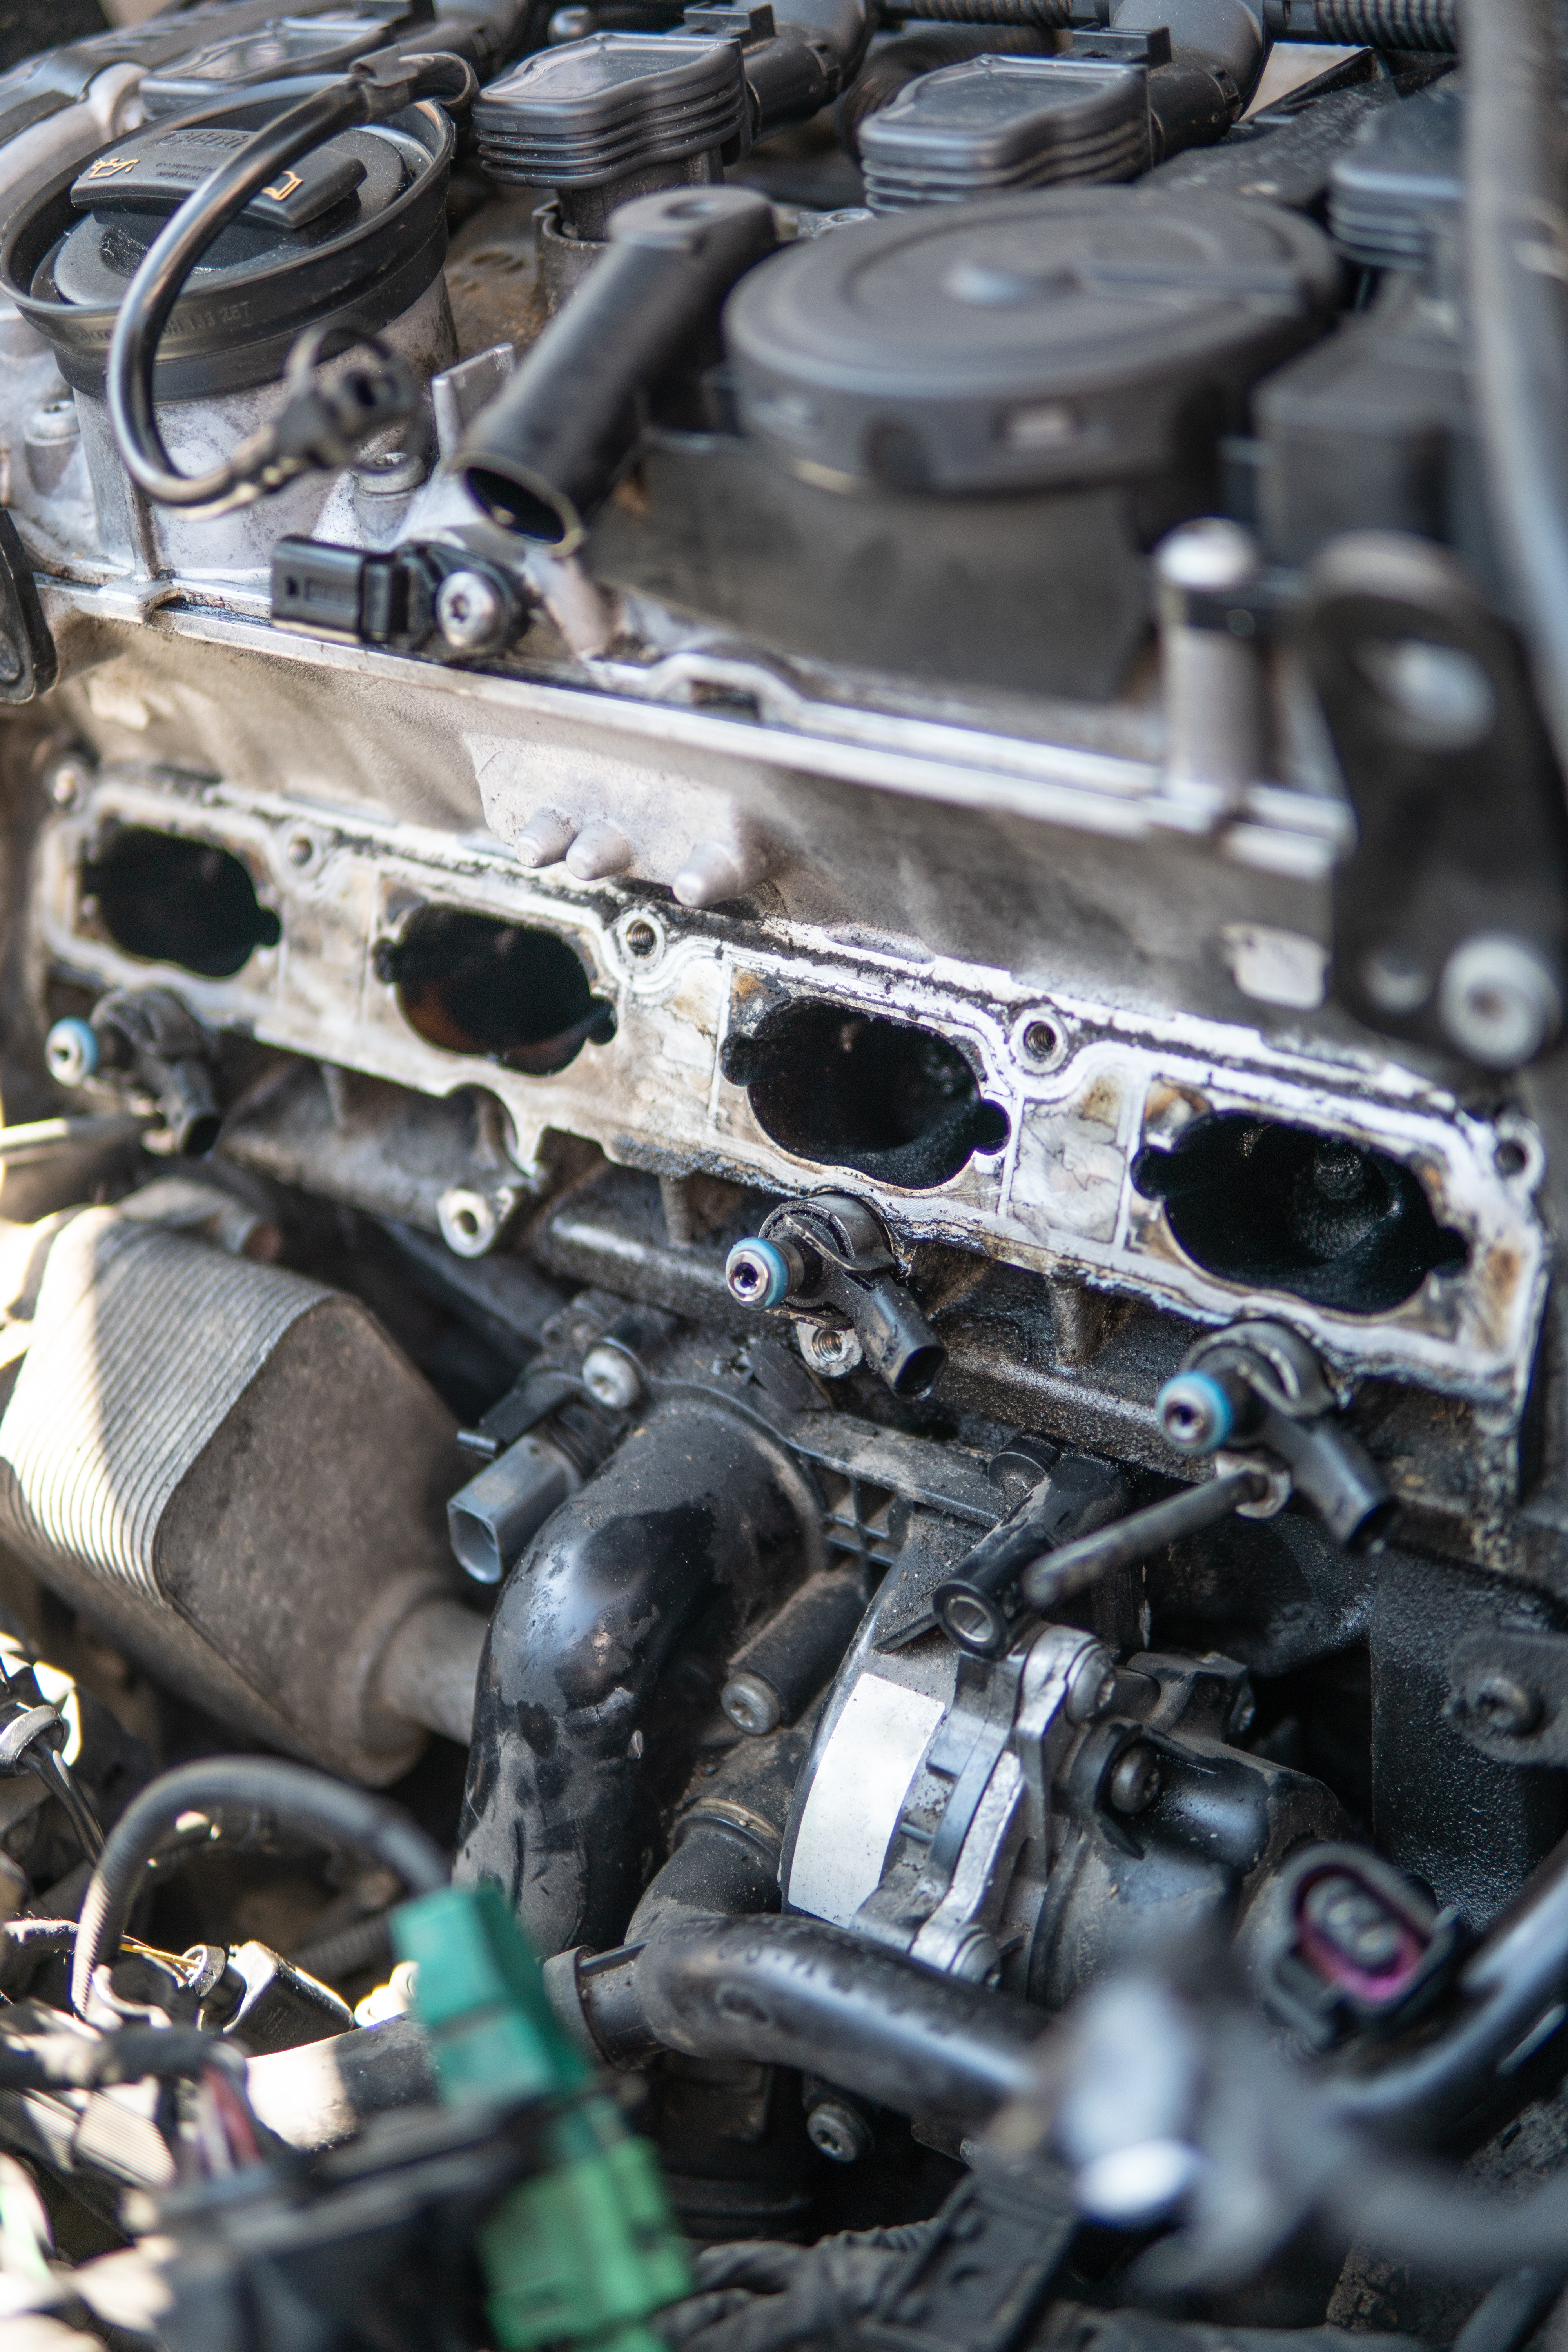 An image of a dirty intake manifold but DPF Alternatives can help with our expert intake manifold cleaning service in Jonesboro / Paragould, AR.